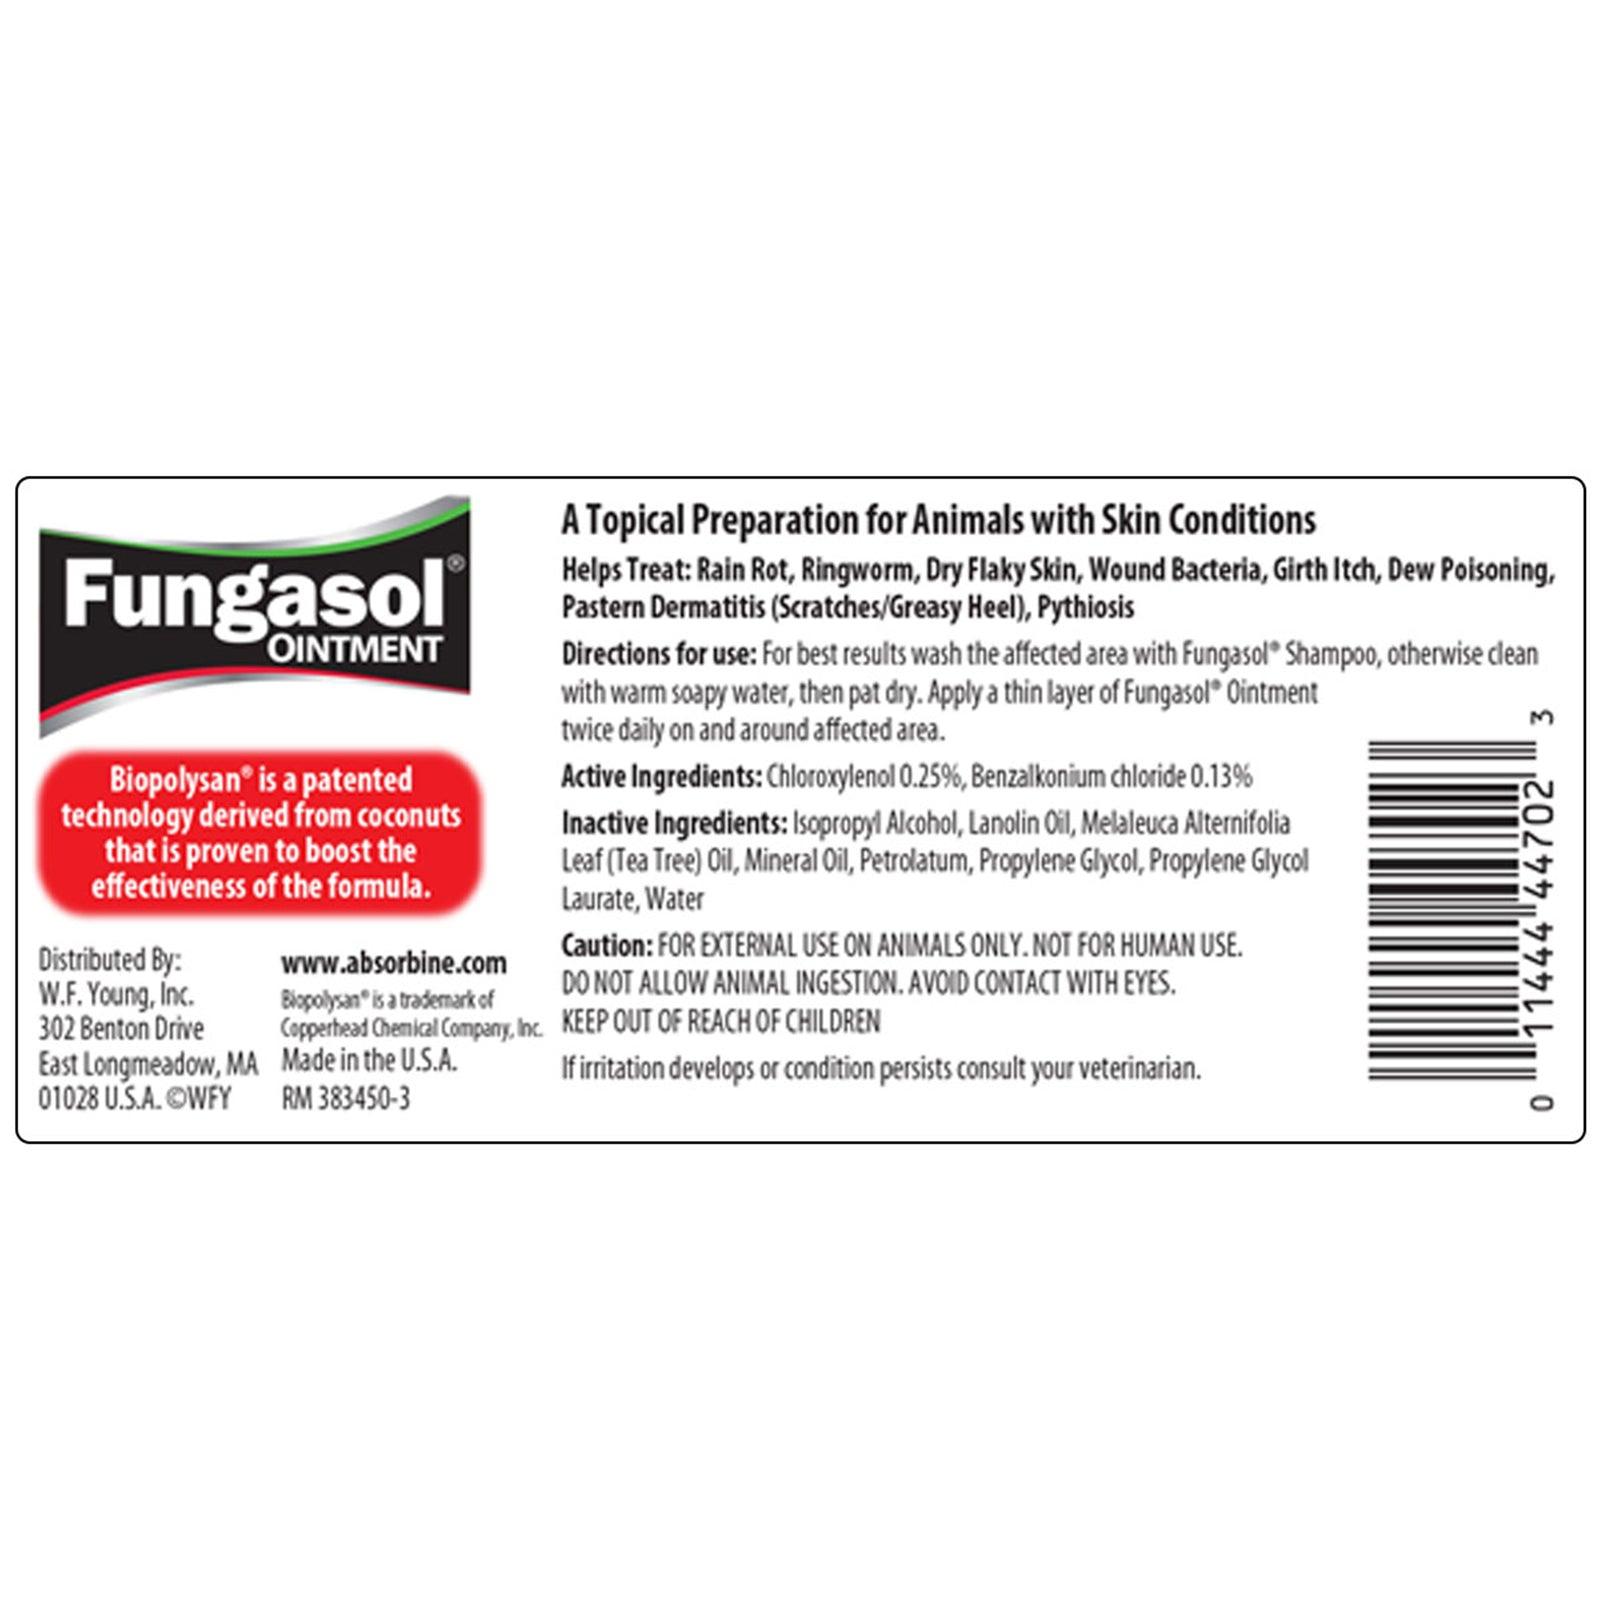 Back label of Fungasol Ointment.  A topical preparation for animals with skin conditions. Biopolysan is a patented technology derived from coconuts that is proven to boost the effectiveness of the formula.